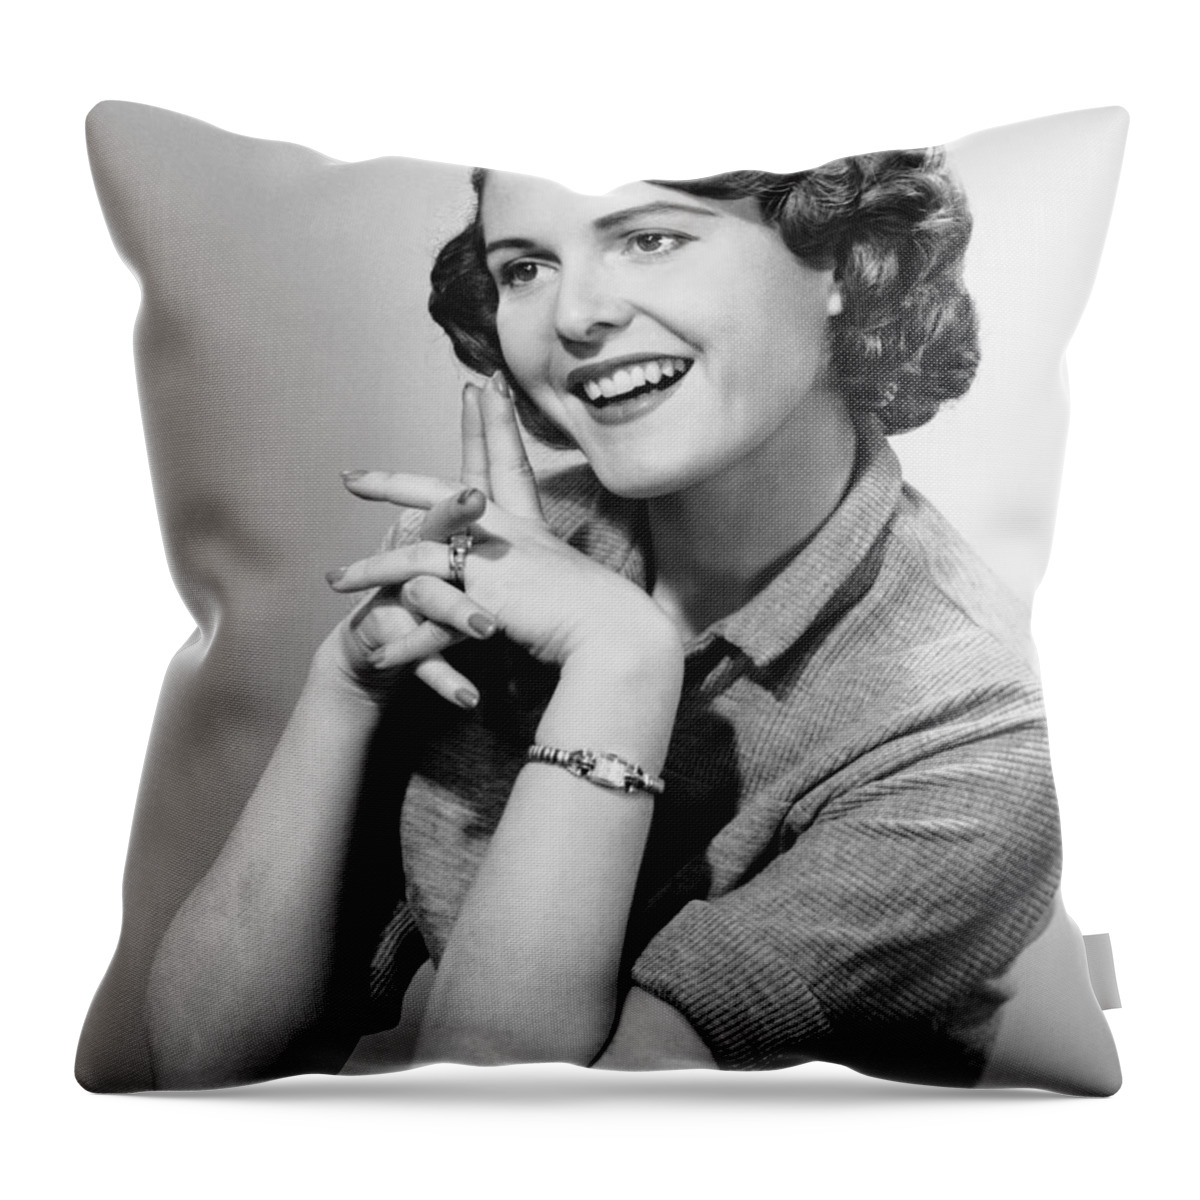 People Throw Pillow featuring the photograph Portrait Of Smiling Woman by George Marks